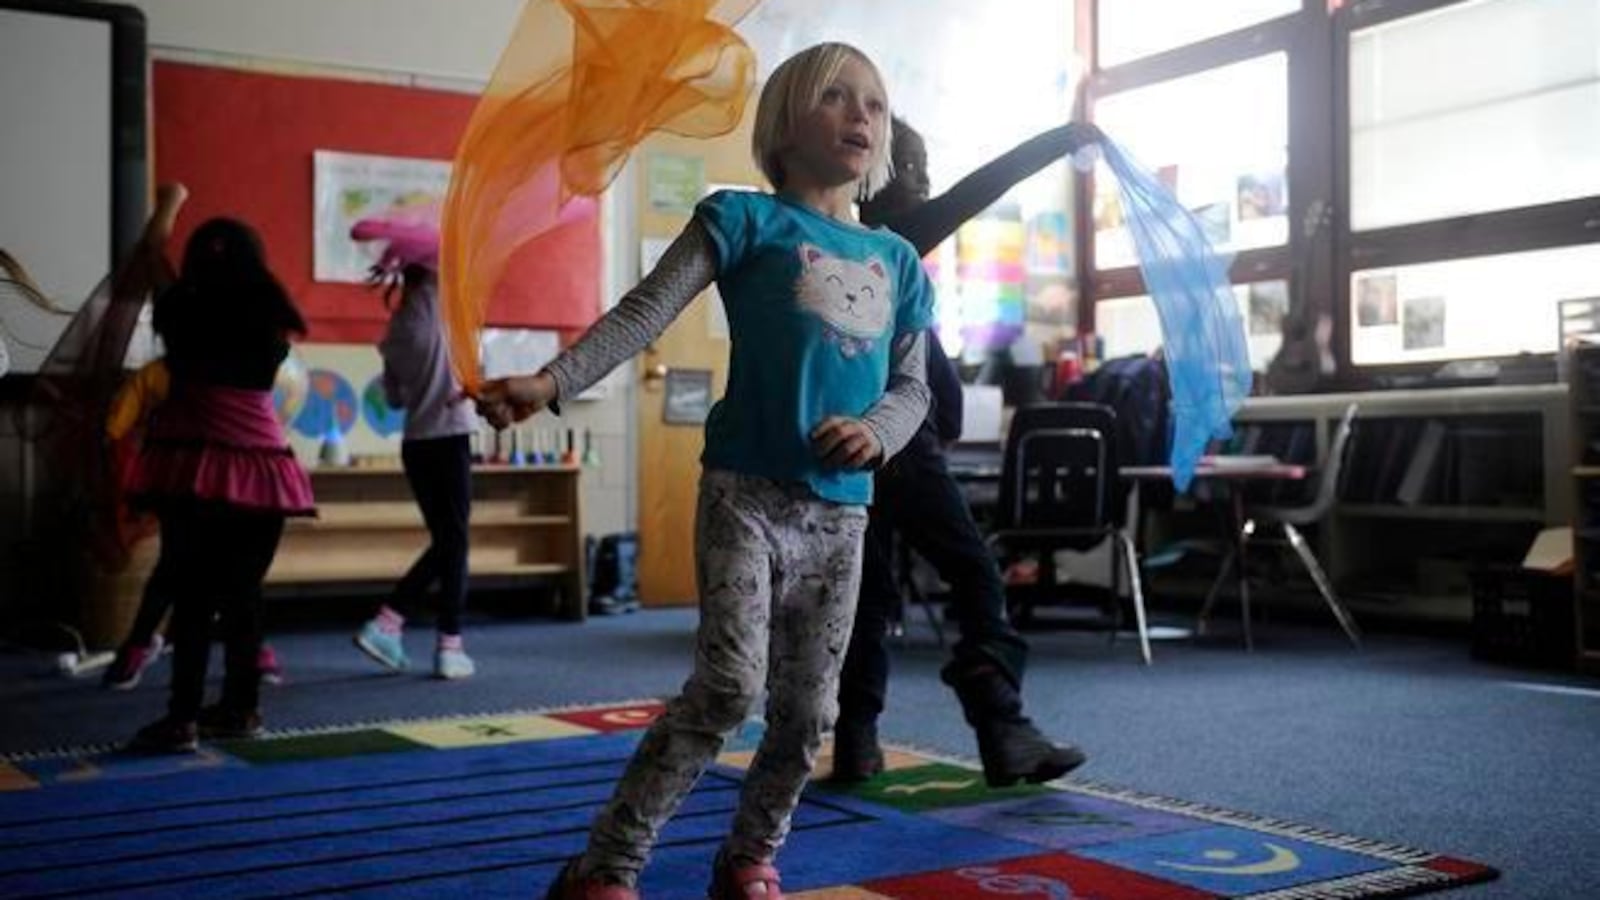 Students dance with brightly colored scarves during a music class at Gilpin Montessori (Denver Post photo).